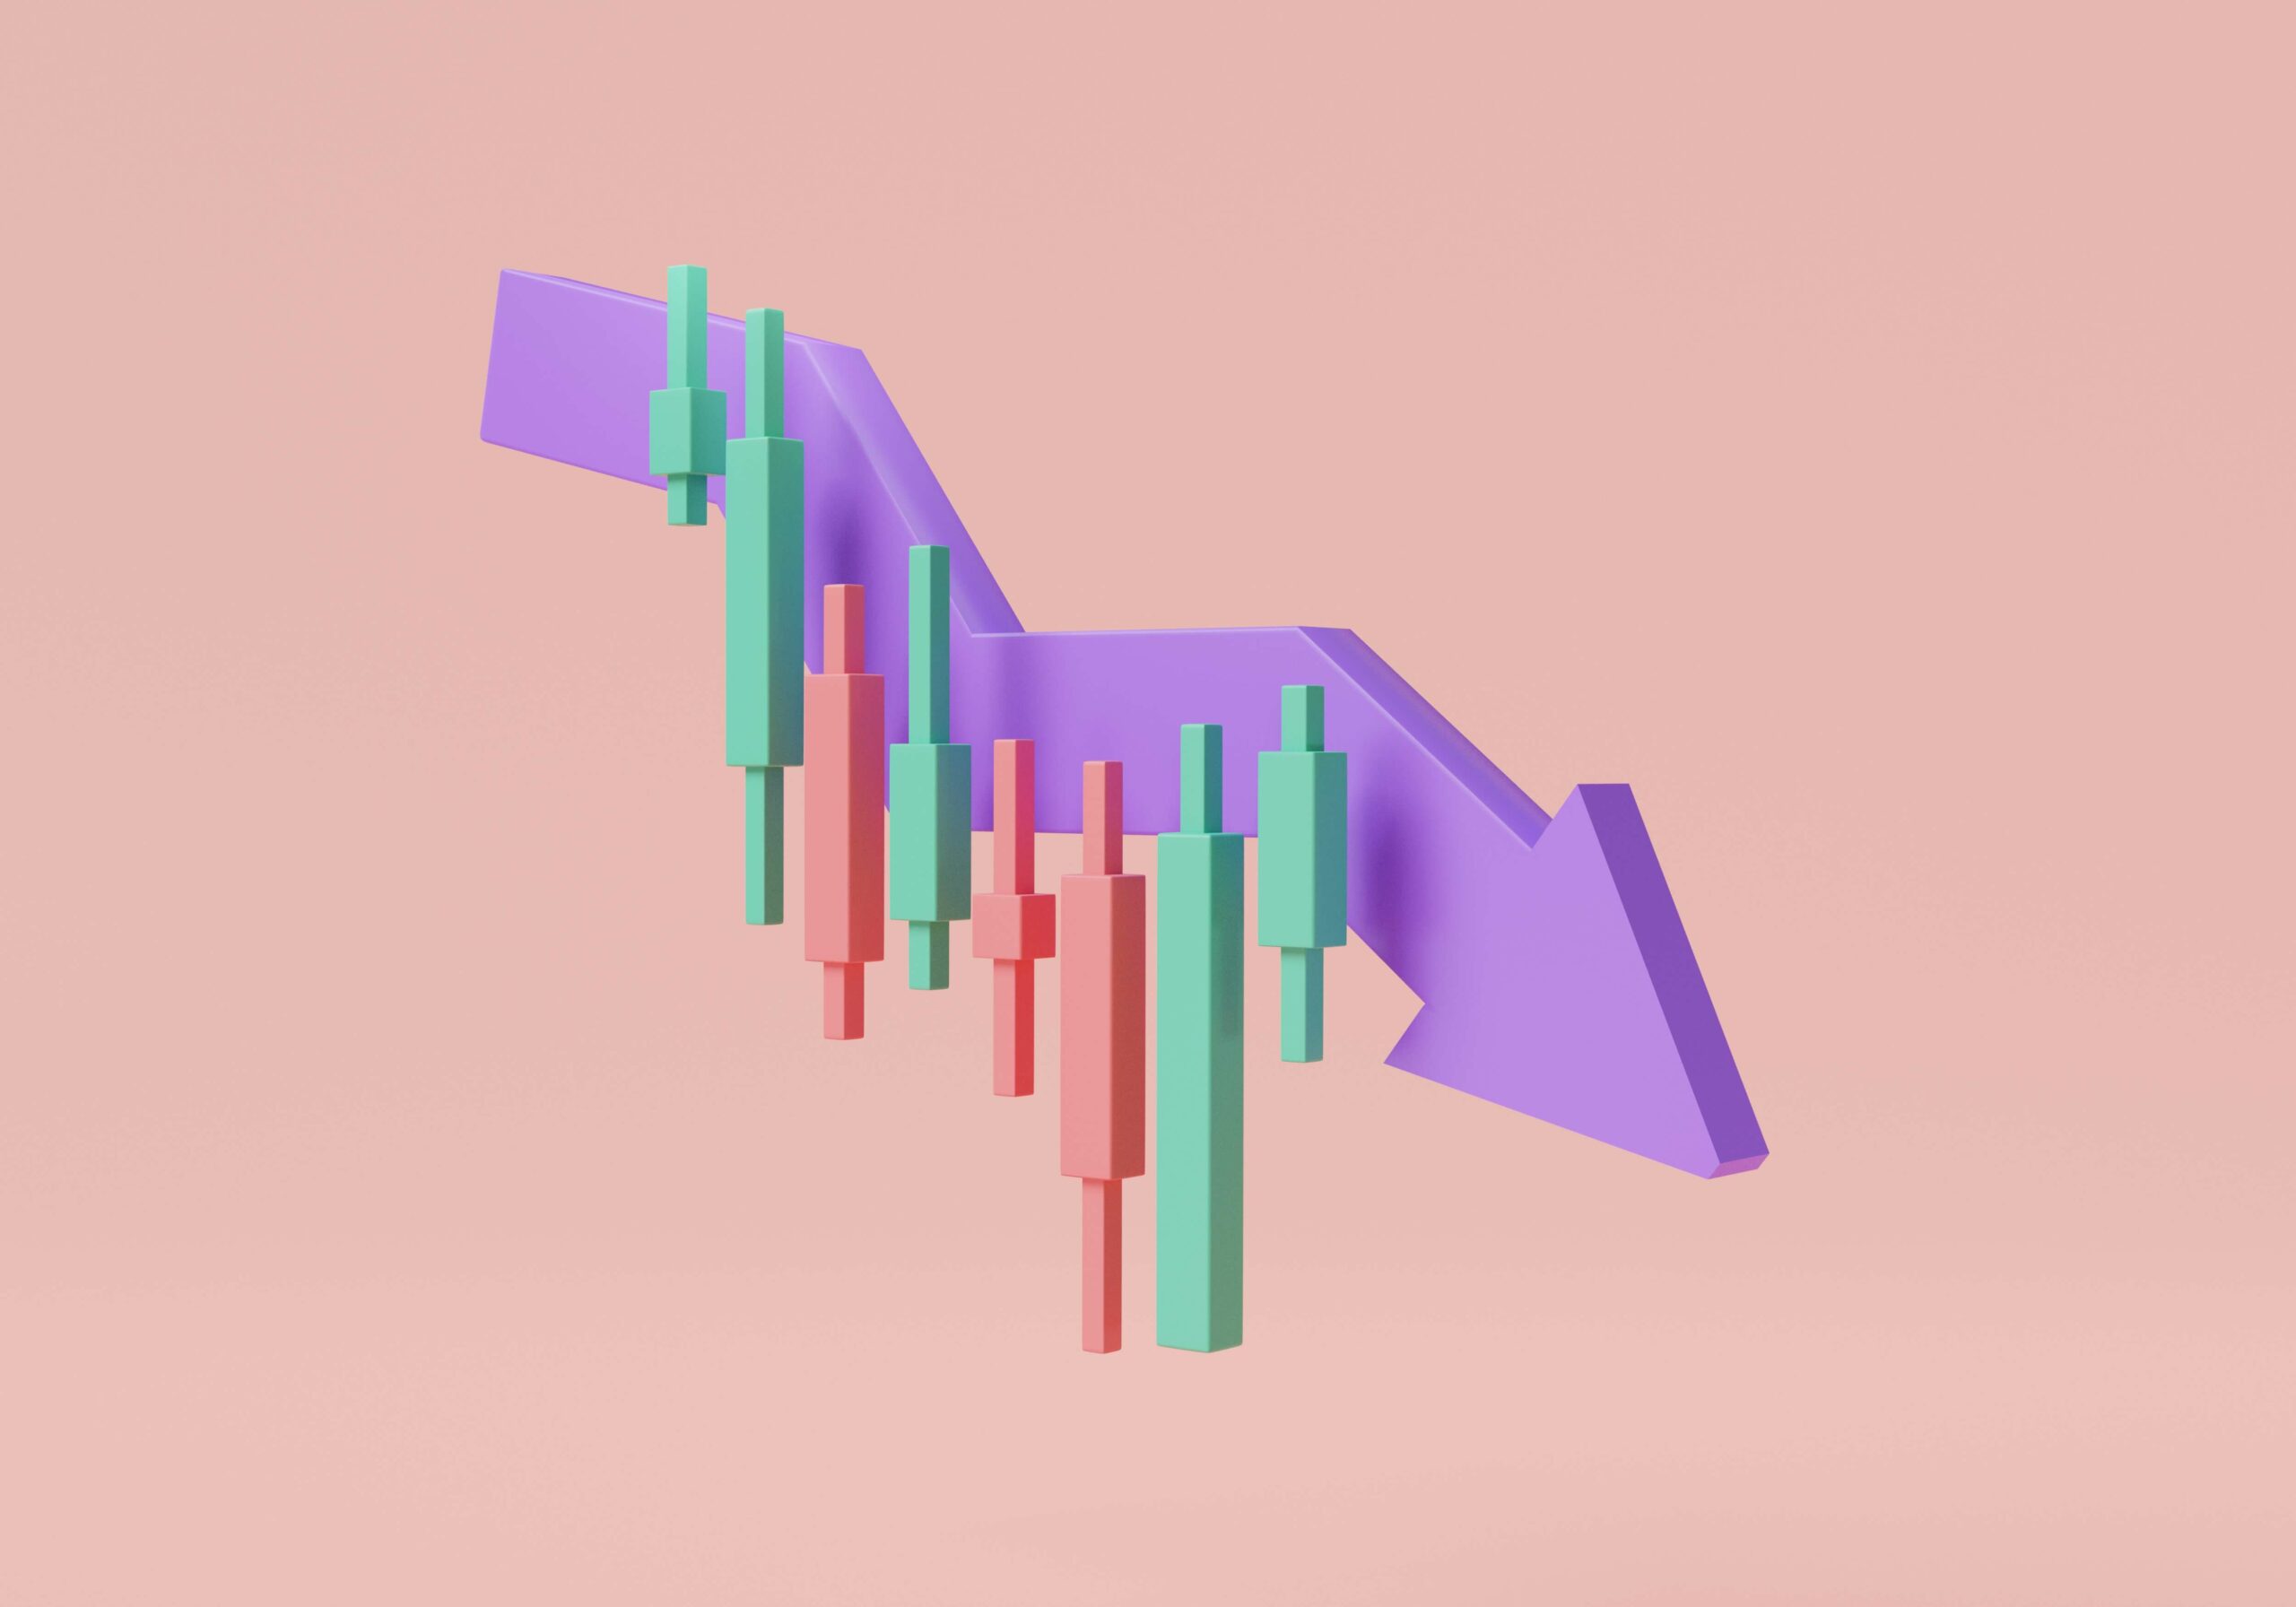 red green candlestick chart with purple arrow downtrend financial crisis downgrade price fall drop cryptocurrency online trading concept trading cryptocurrency 3d icon render illustration copia scaled